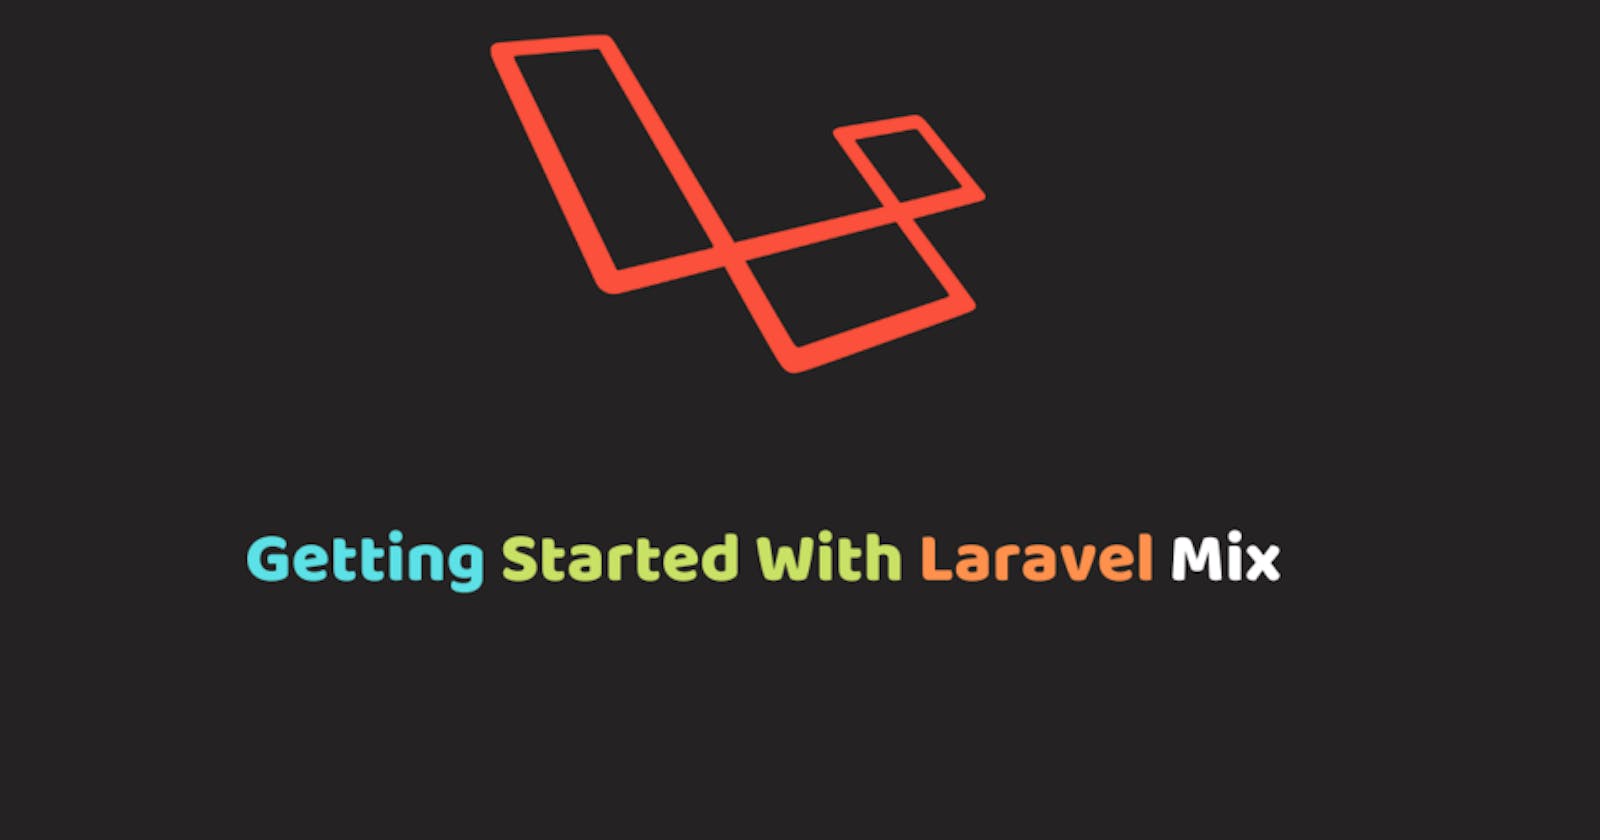 Getting Started With Laravel Mix